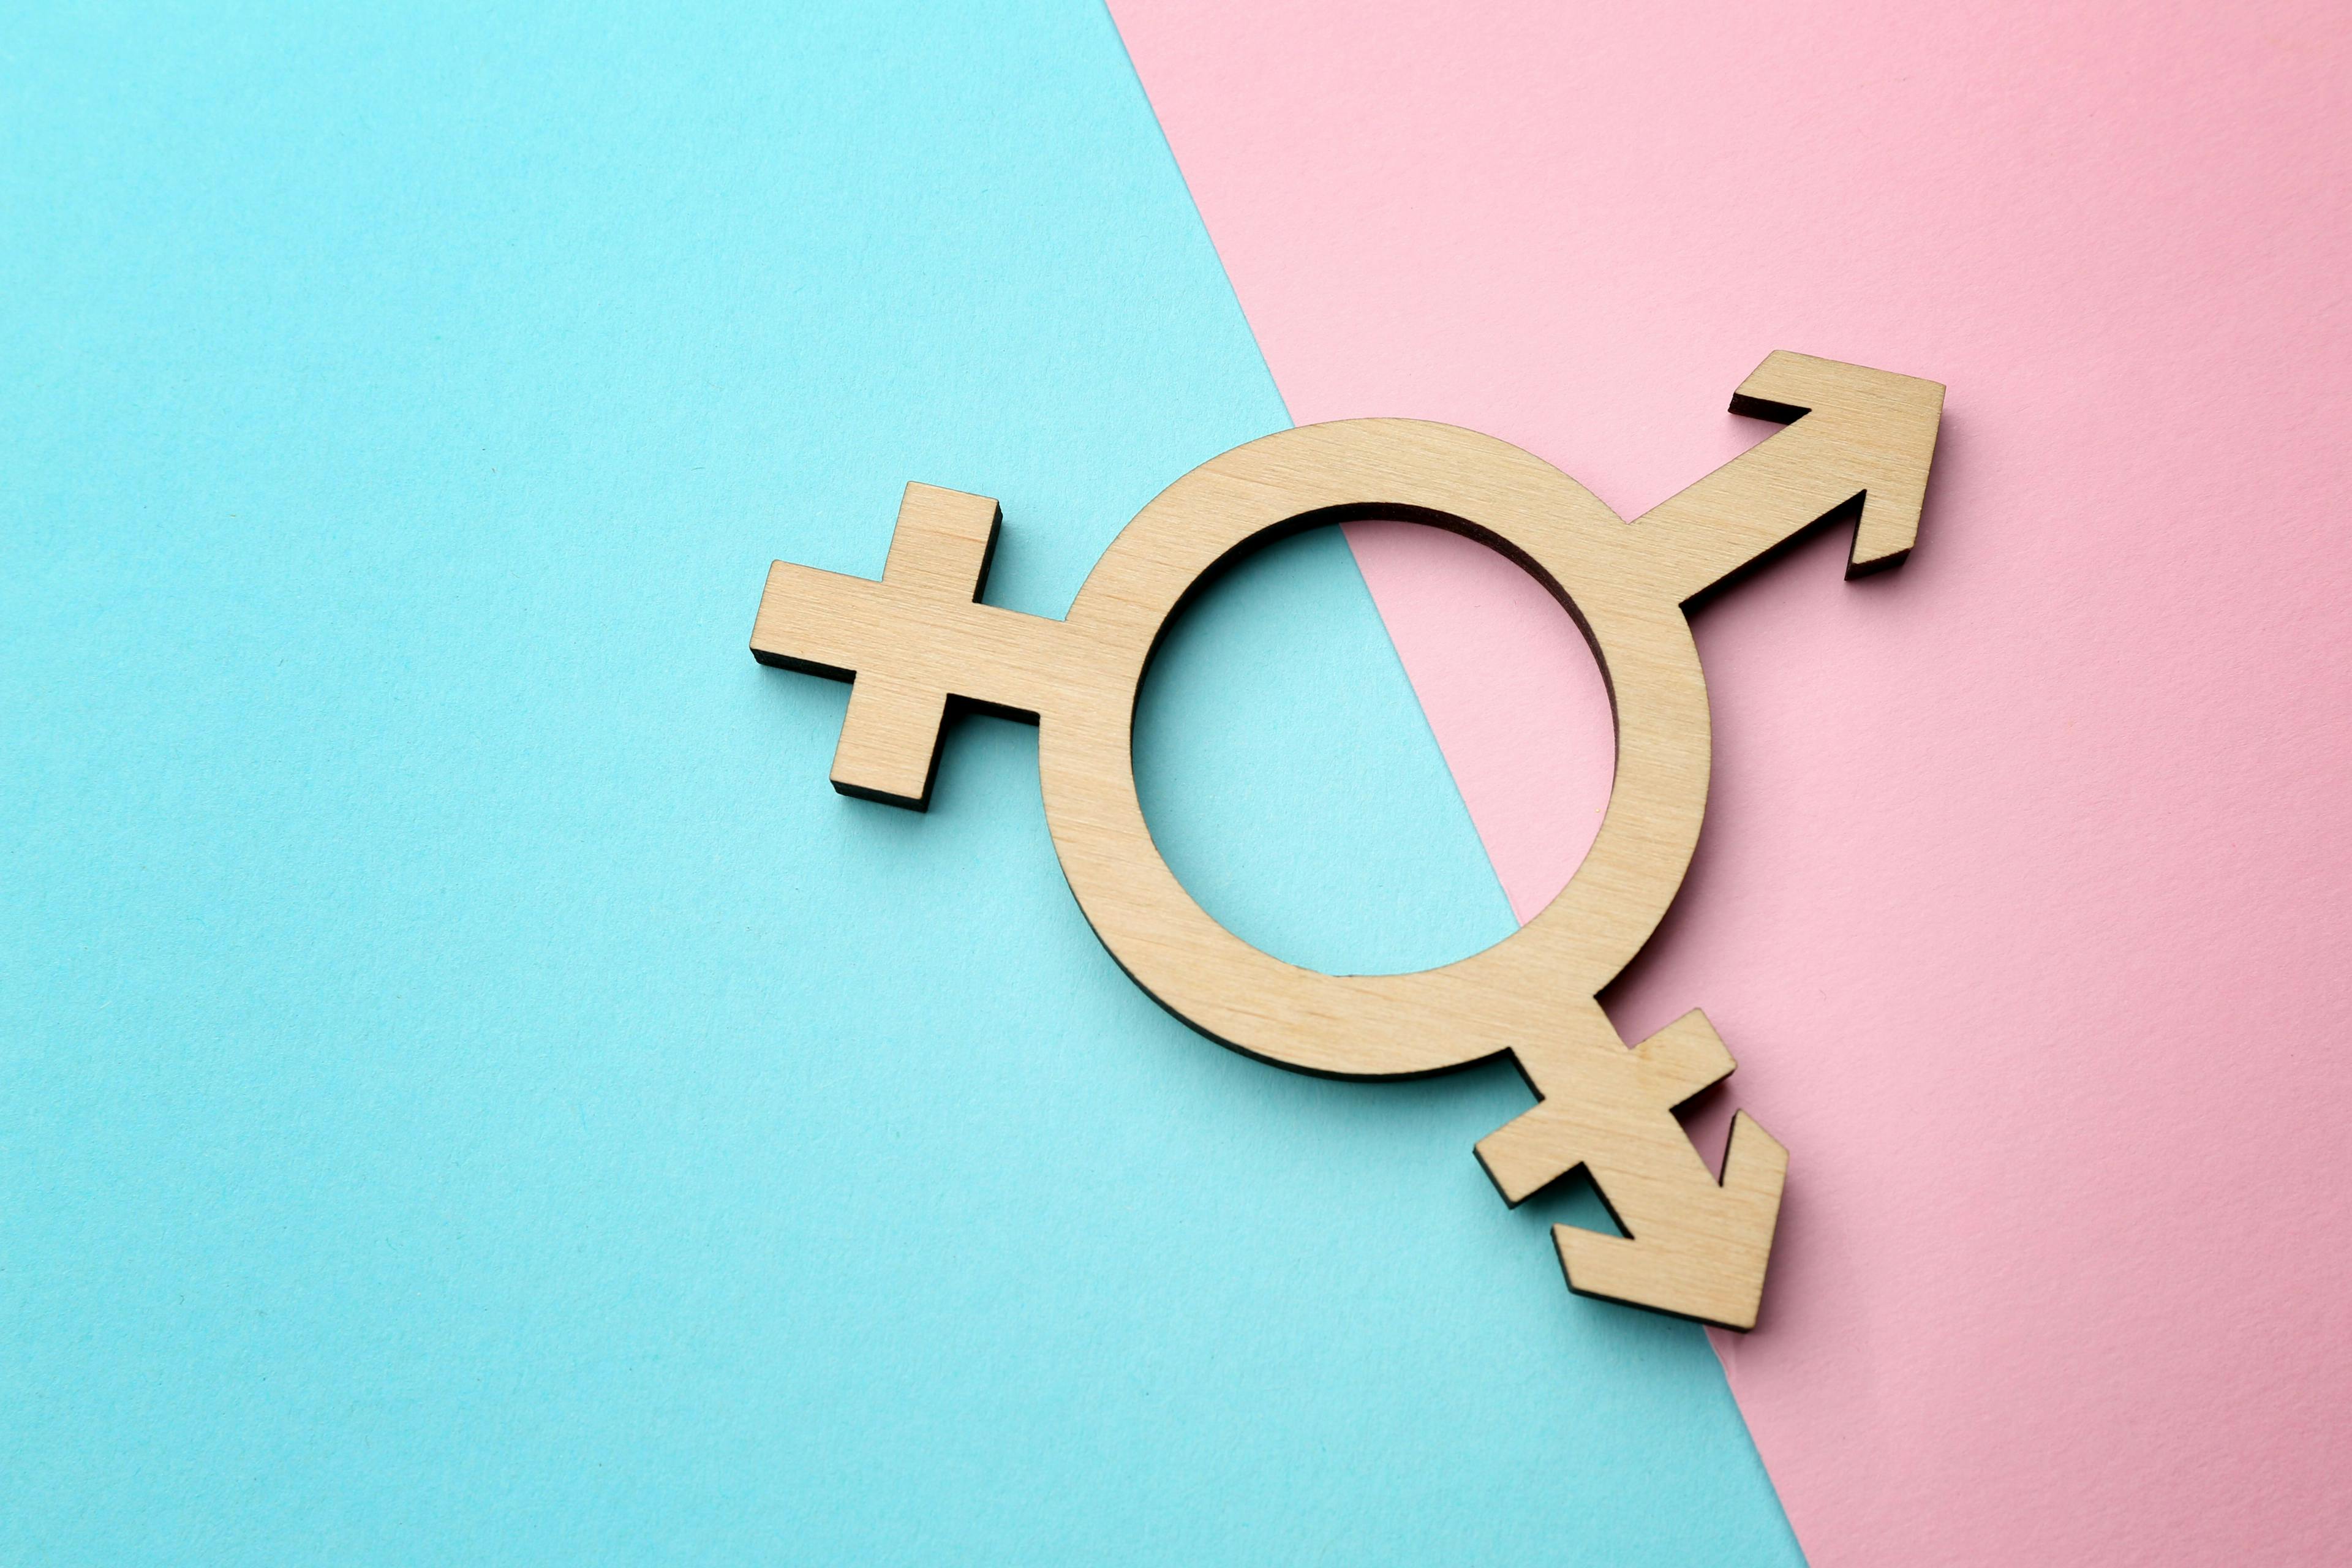 Hormone therapy linked to positive changes in appearance congruence, mental health for transgender and nonbinary youth